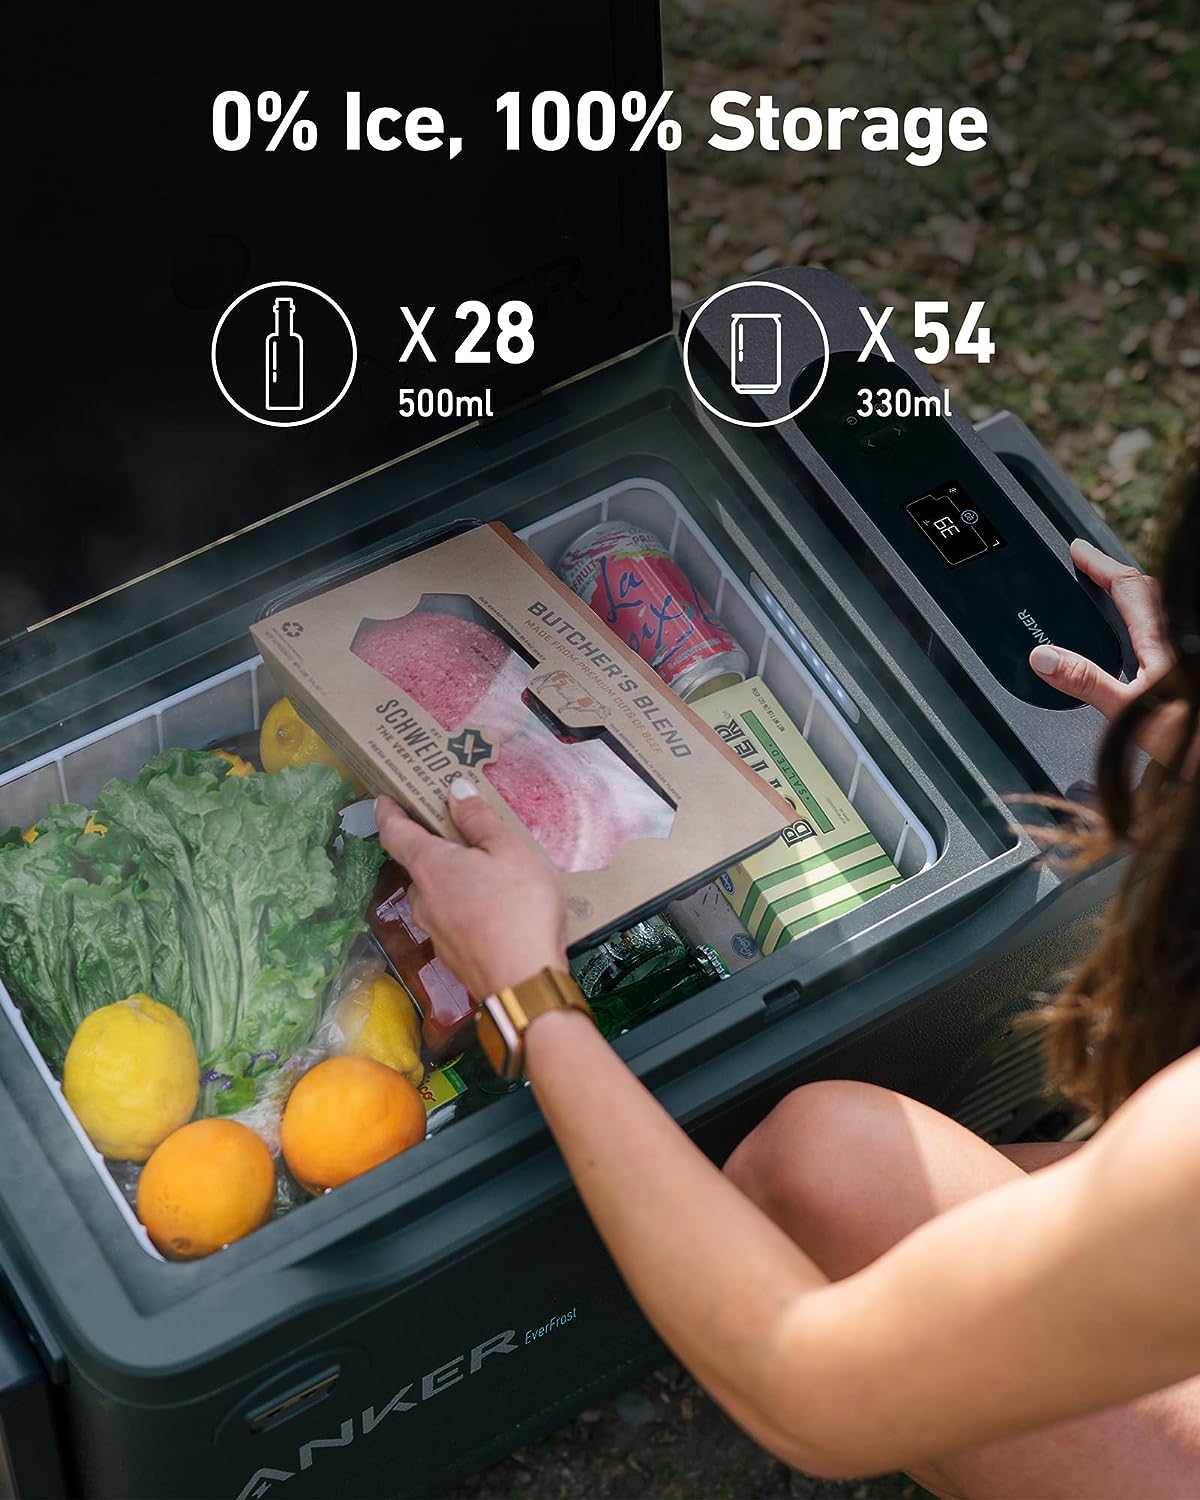 Anker - EverFrost Powered Cooler 40